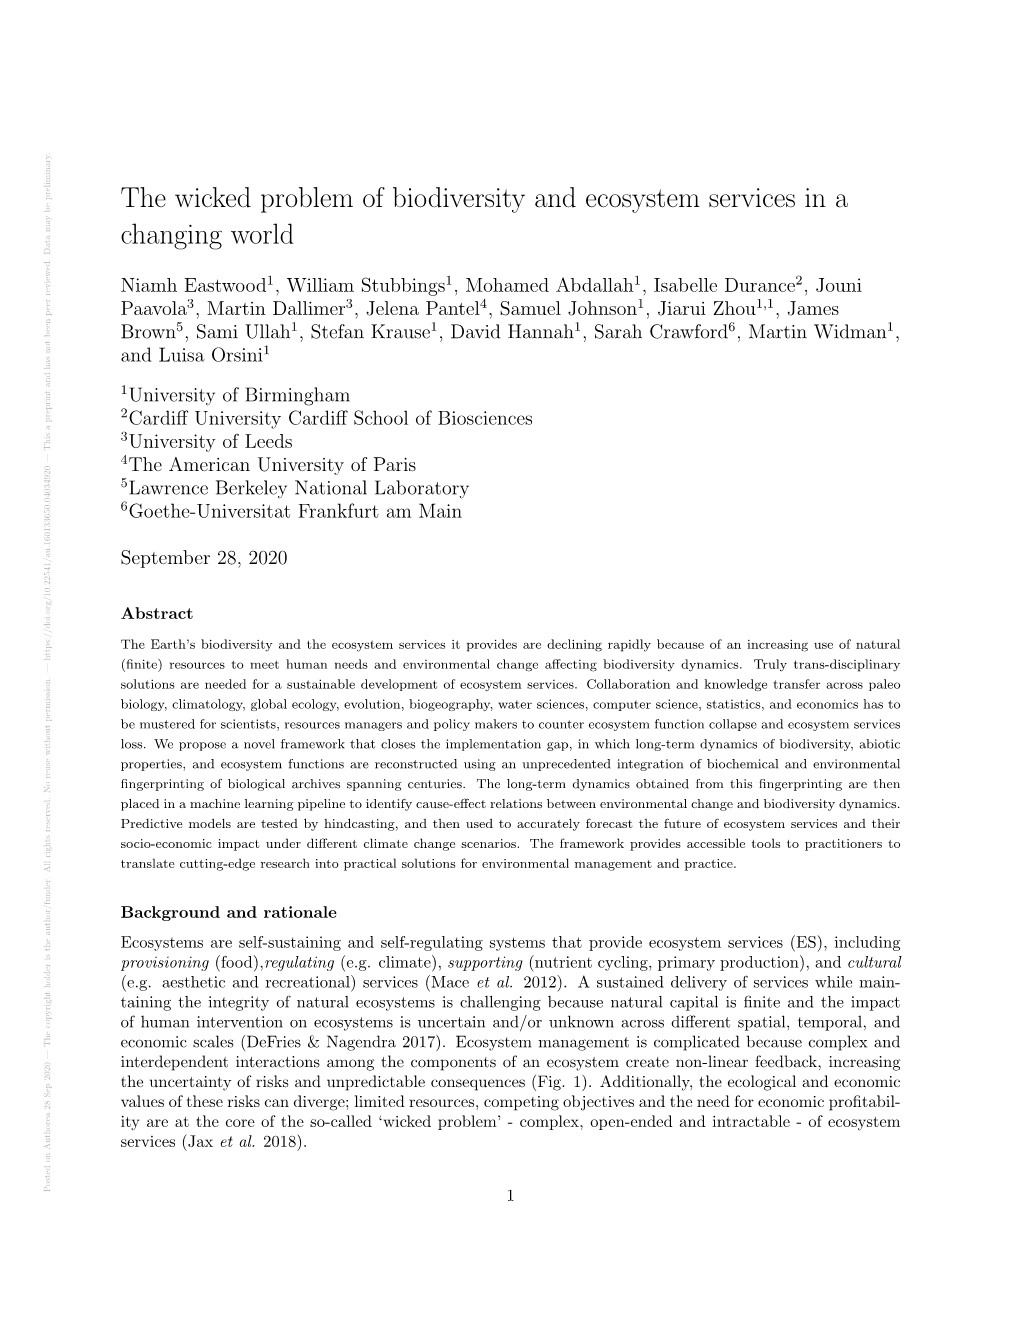 The Wicked Problem of Biodiversity and Ecosystem Services in A